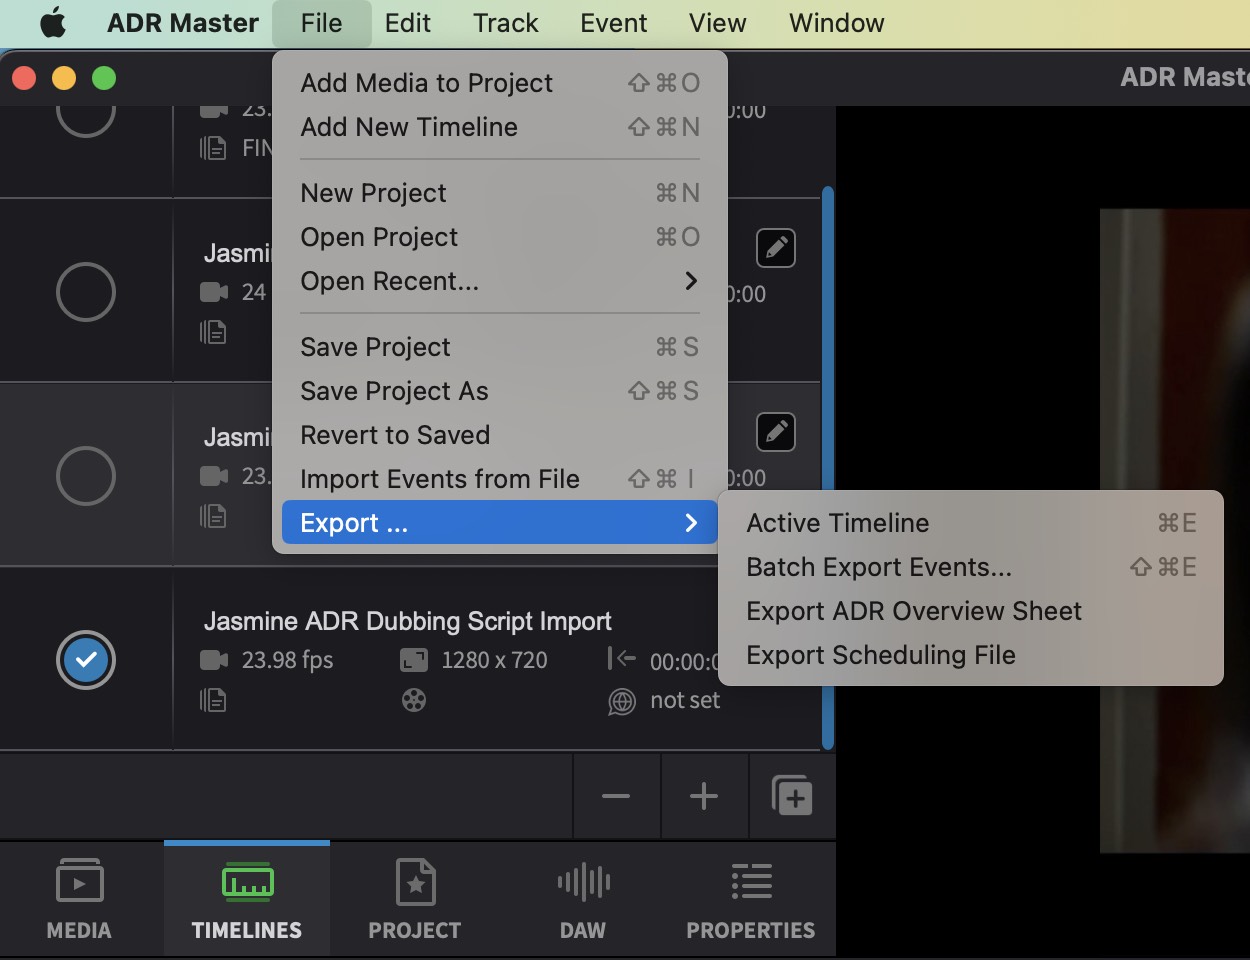 Export Options in ADR Master